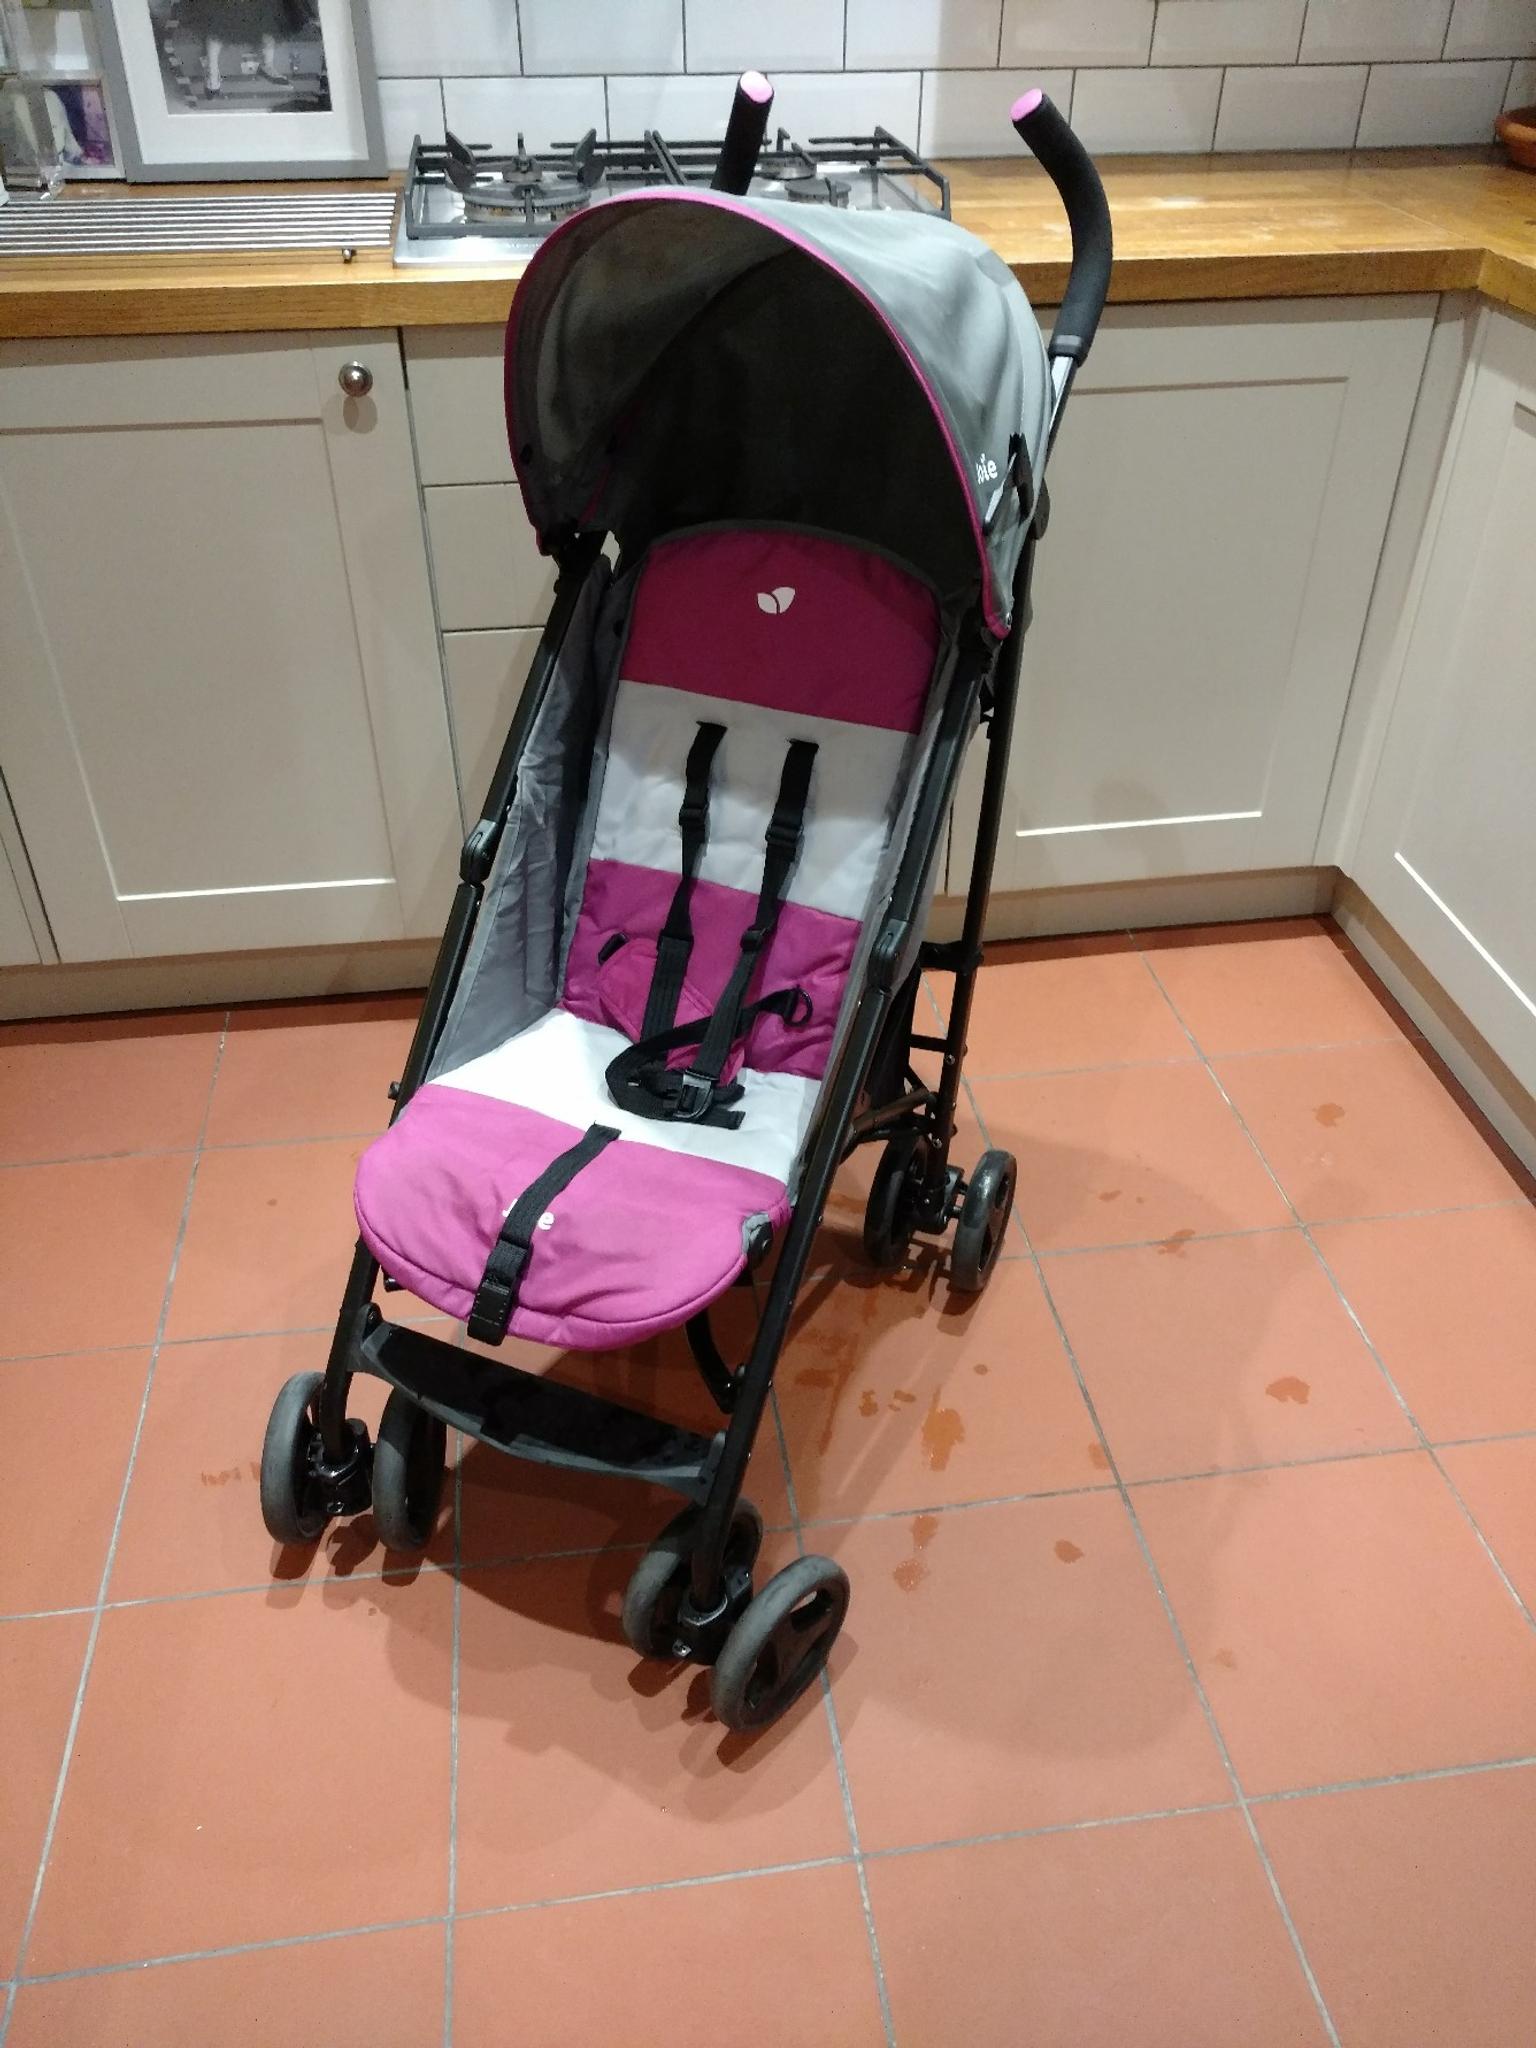 joie nitro stroller charcoal pink